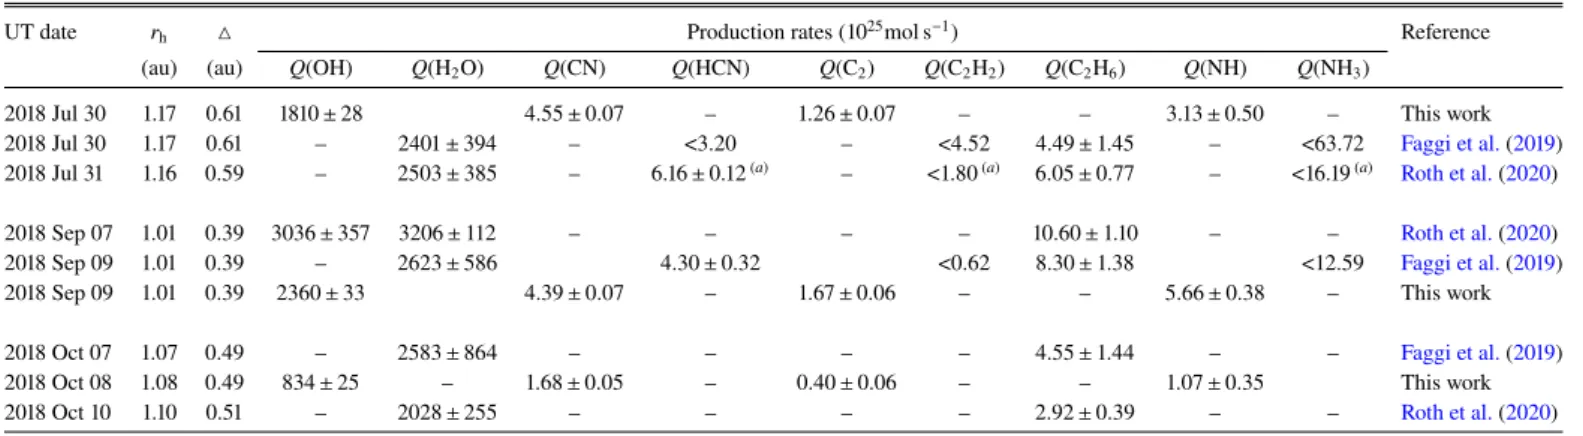 Table 4. Comparison of daughter molecules and possible parent molecule production rates derived from optical and infrared data of comet 21P in the 2018 passage.